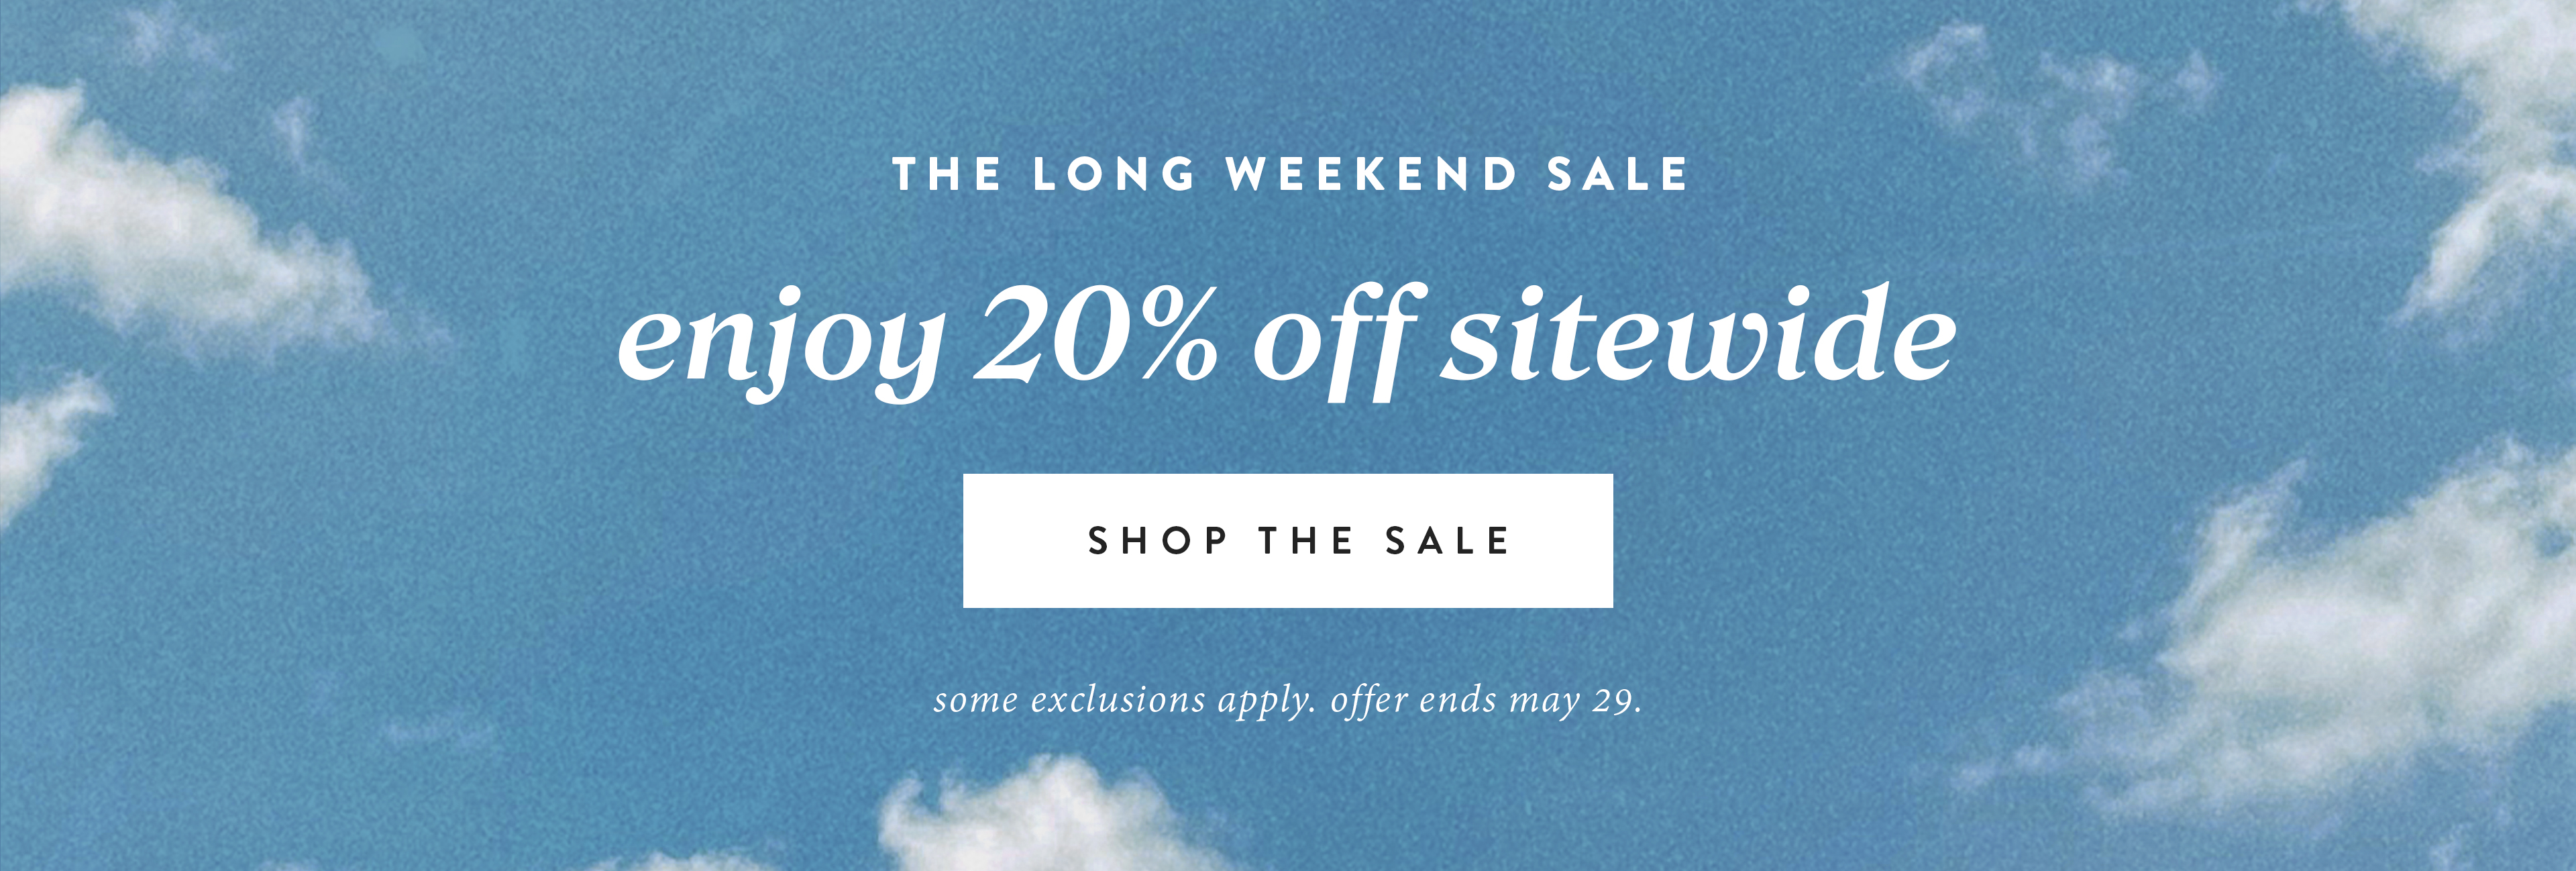 The Long Weekend Sale.  Enjoy 20% off sitewide.  shop the sale.  some exclusions apply.  offer ends May 29.